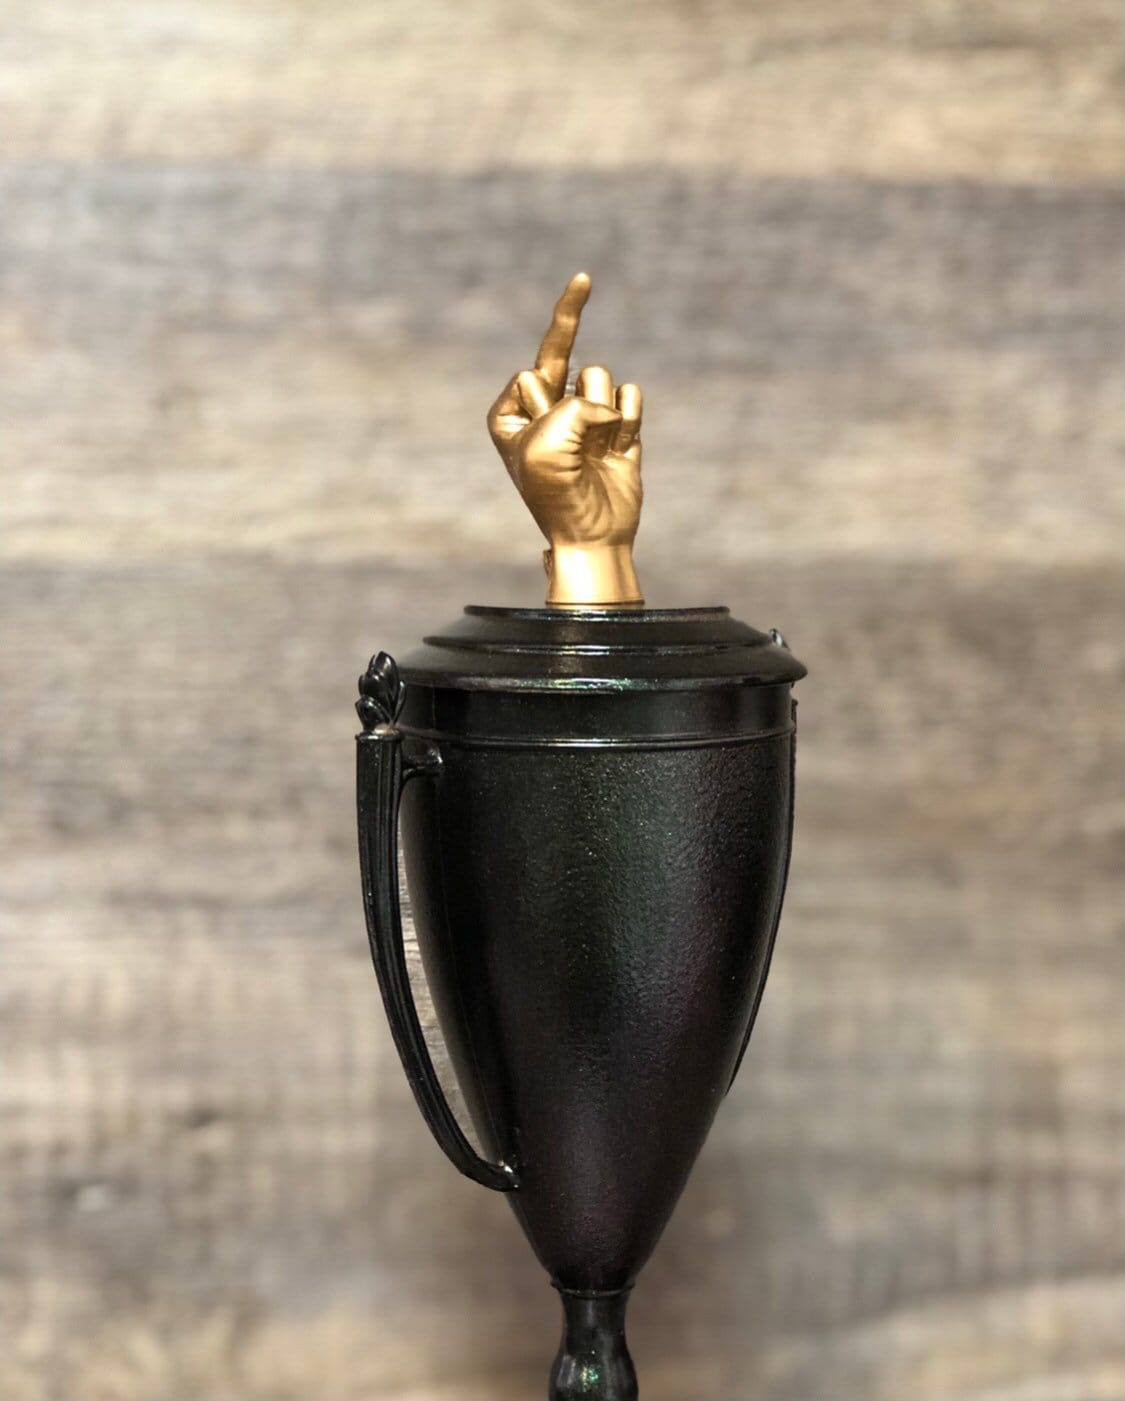 Middle Finger Funny Golf Trophy Hole In One Iridescent Cup Loser Award Adult Humor The Bird F*ck You One Finger Two Words Gag Gift